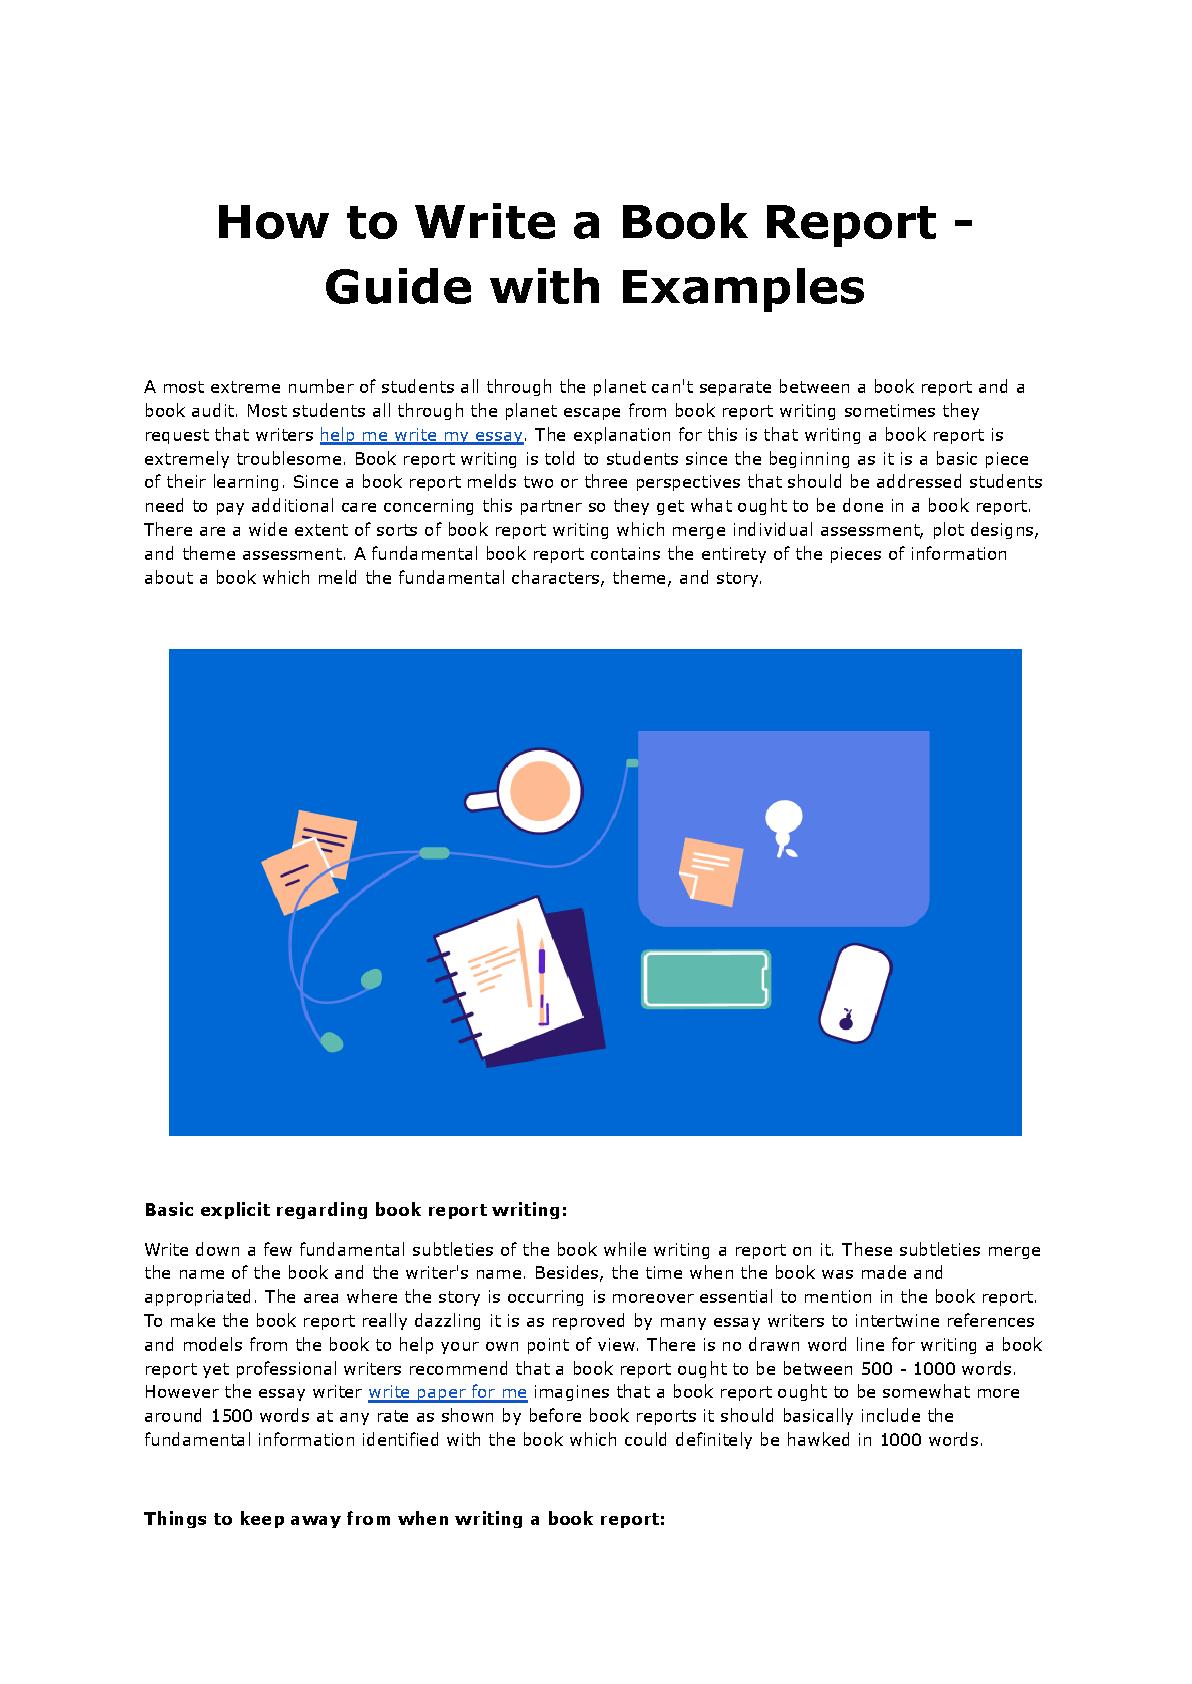 how-to-write-a-book-report-guide-with-examples-pdf-host